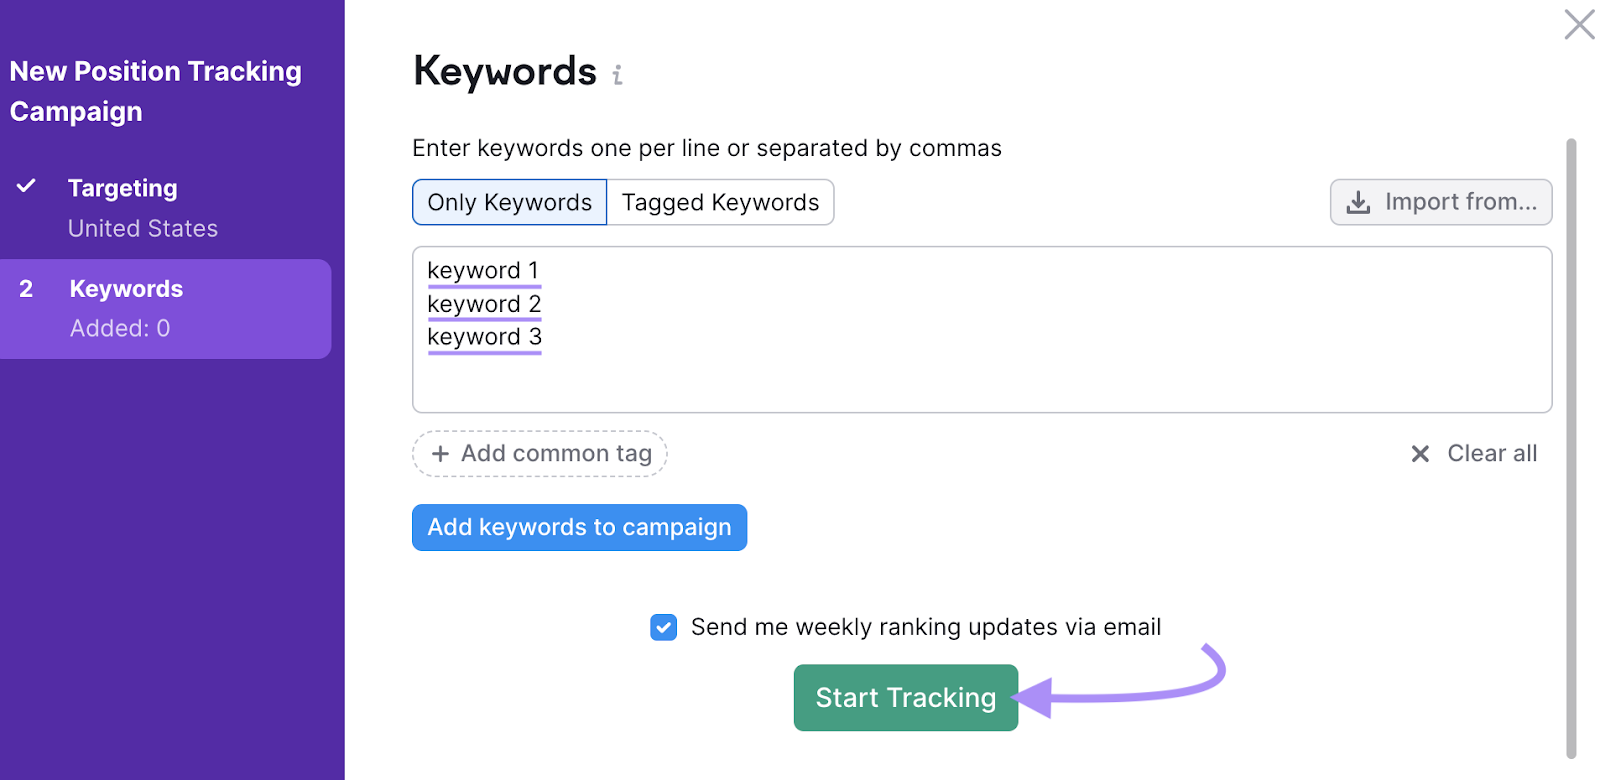 "Keywords" configuration step in Position Tracking